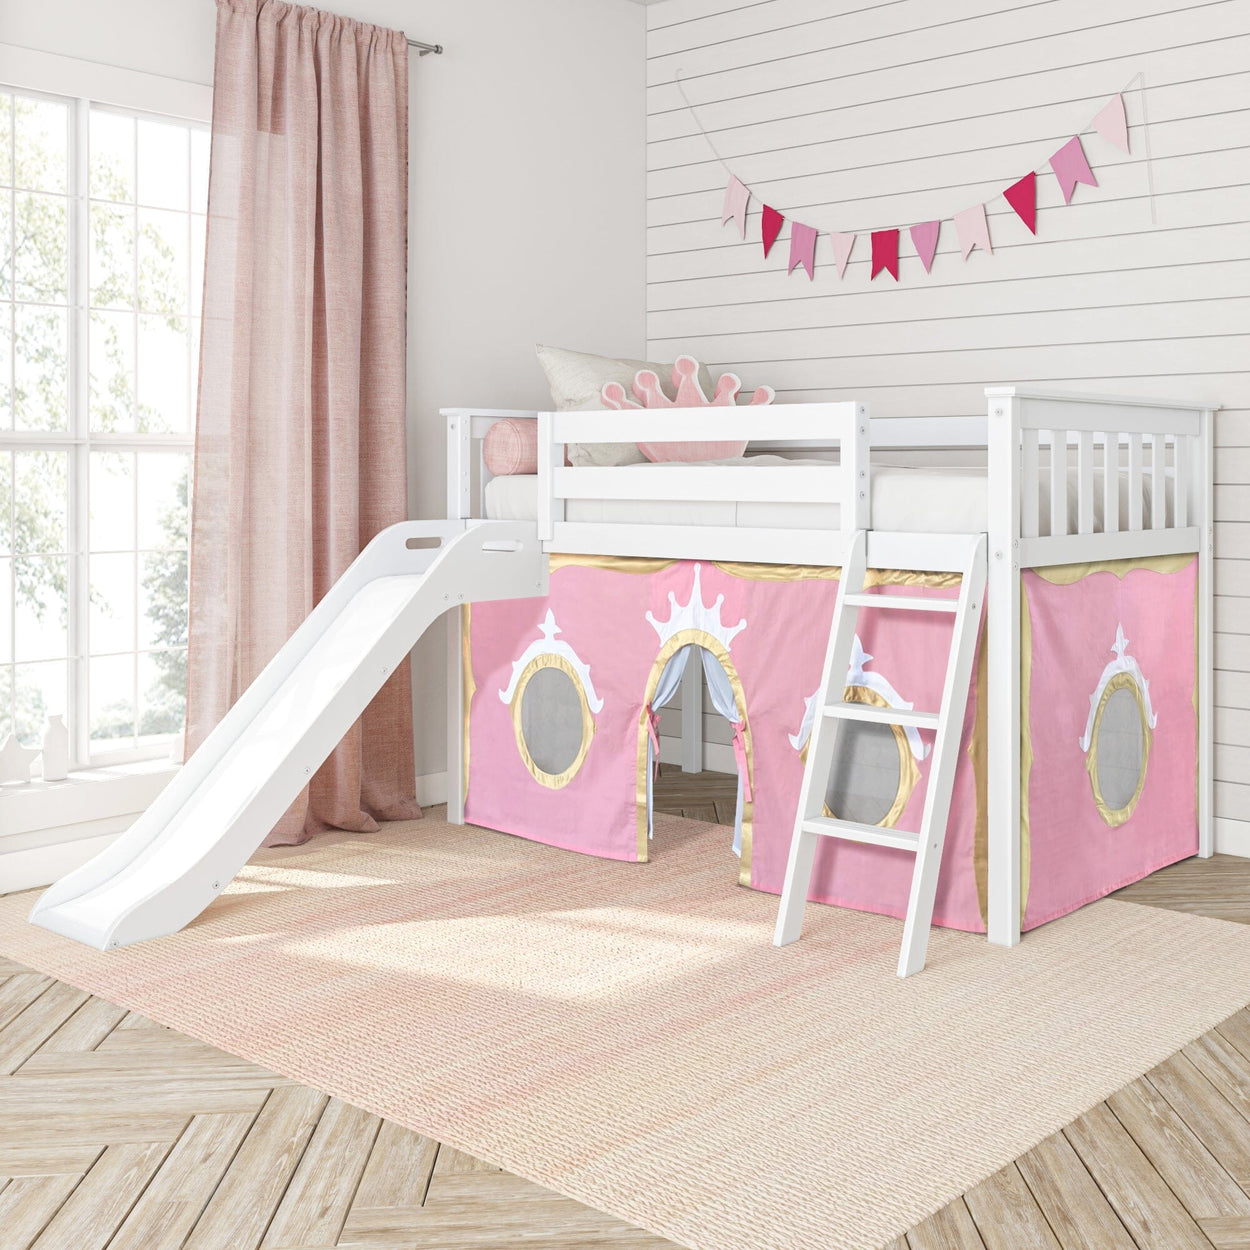 180413002083 : Loft Beds Low Loft with Easy Slide and Light Pink and Gold Princess Curtain, White